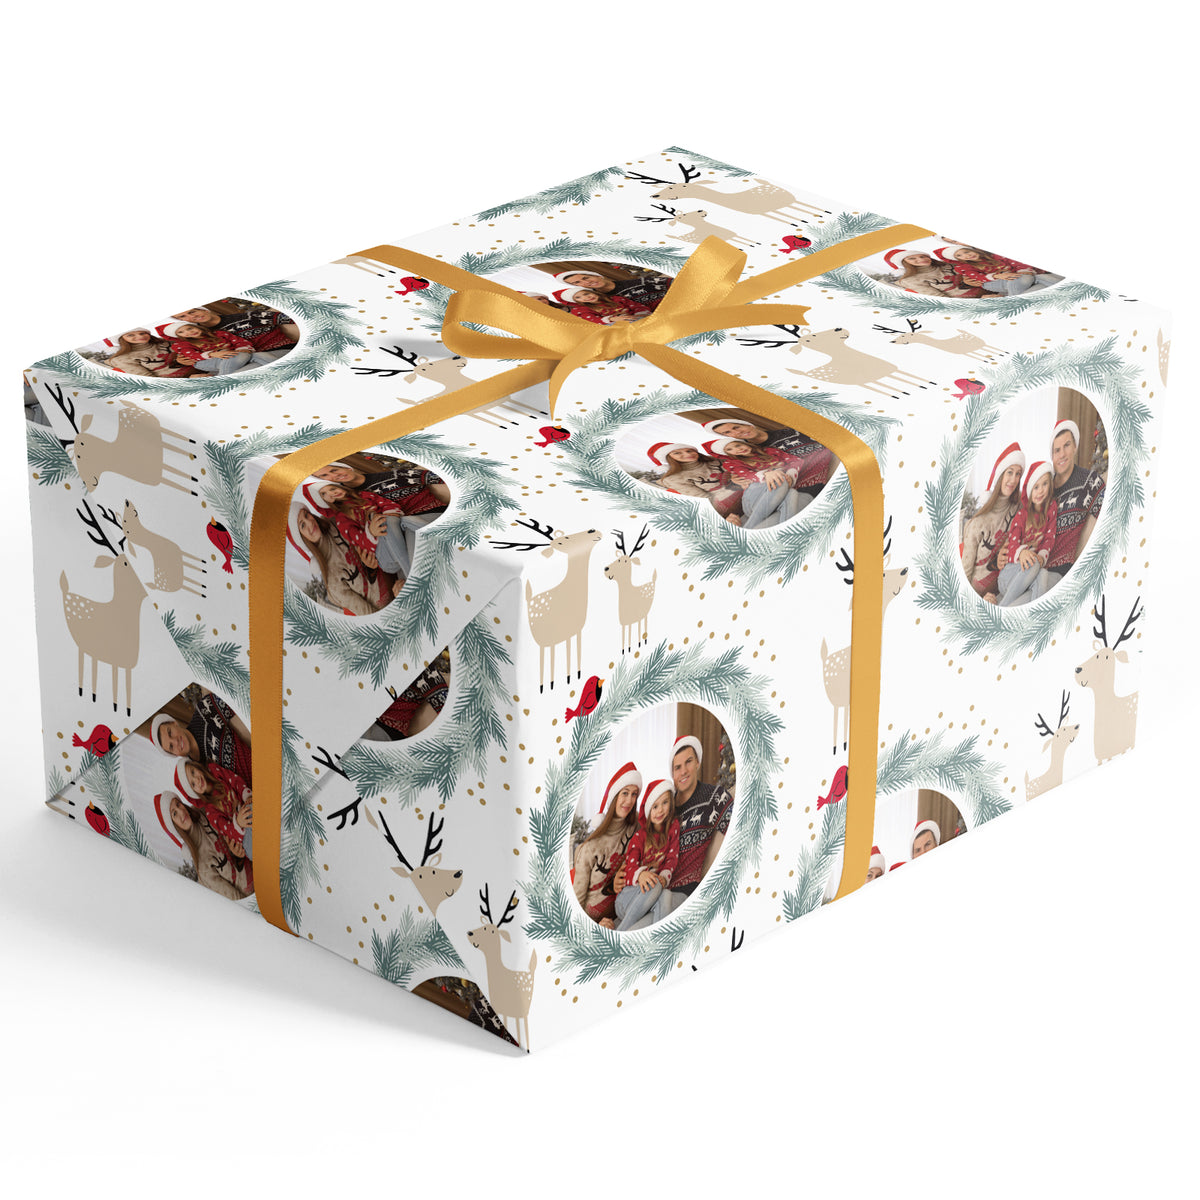 Custom Wrapping Paper, Christmas Gift Wrap, Paper - Yahoo Shopping